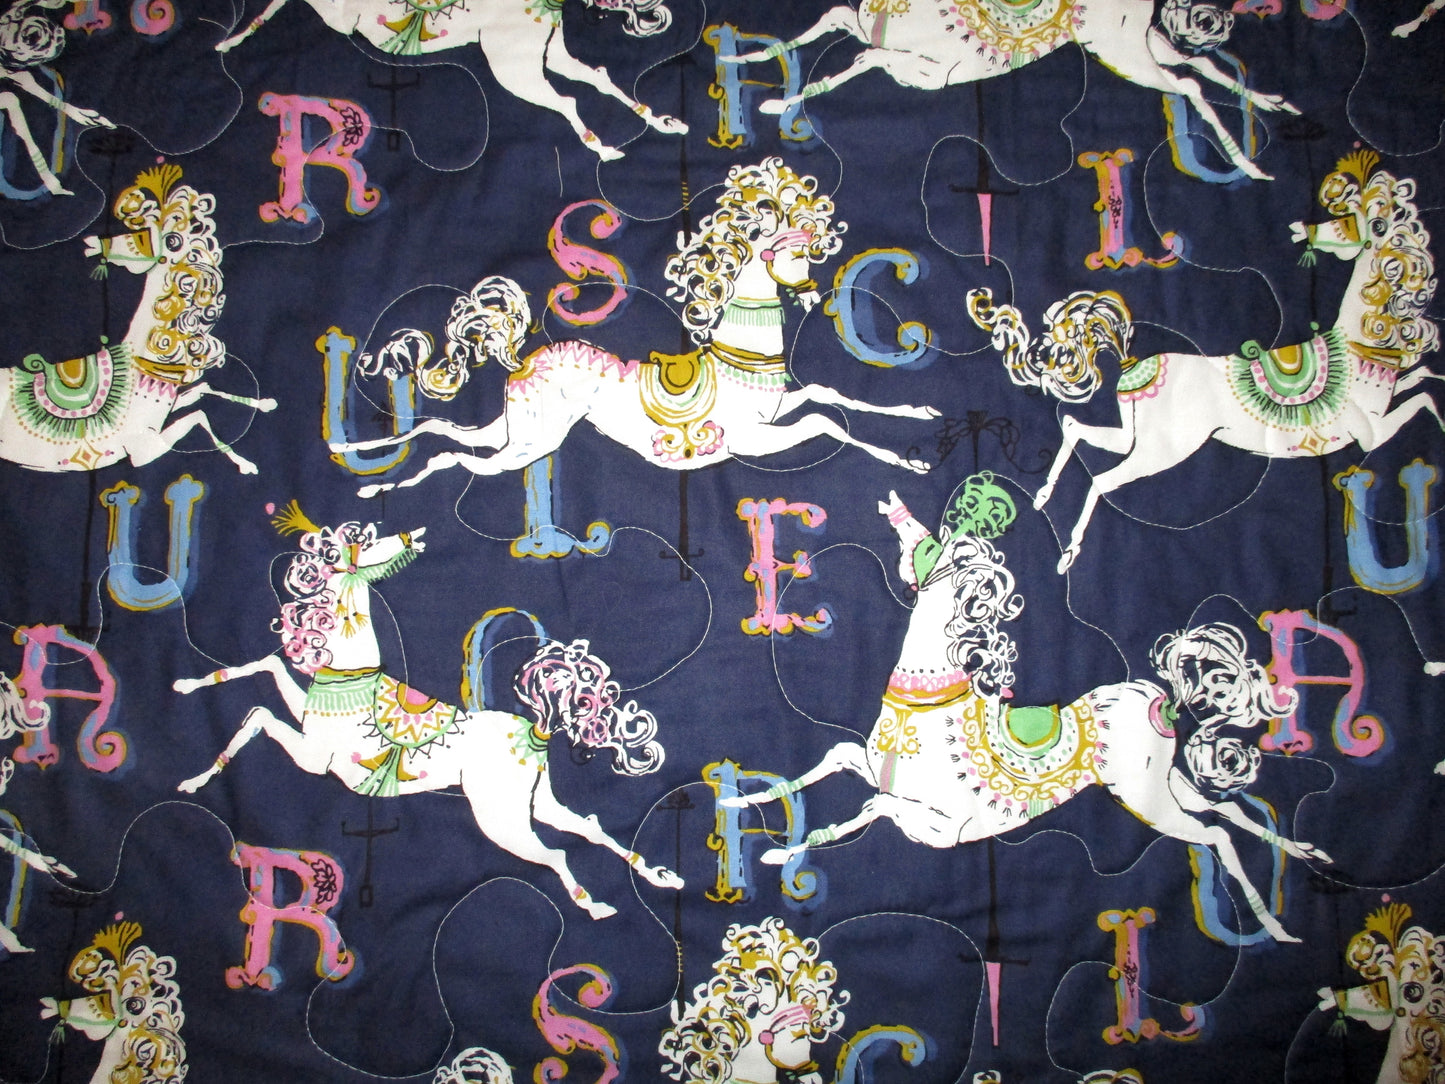 CAROUSEL WHITE HORSES Quilted Blanket